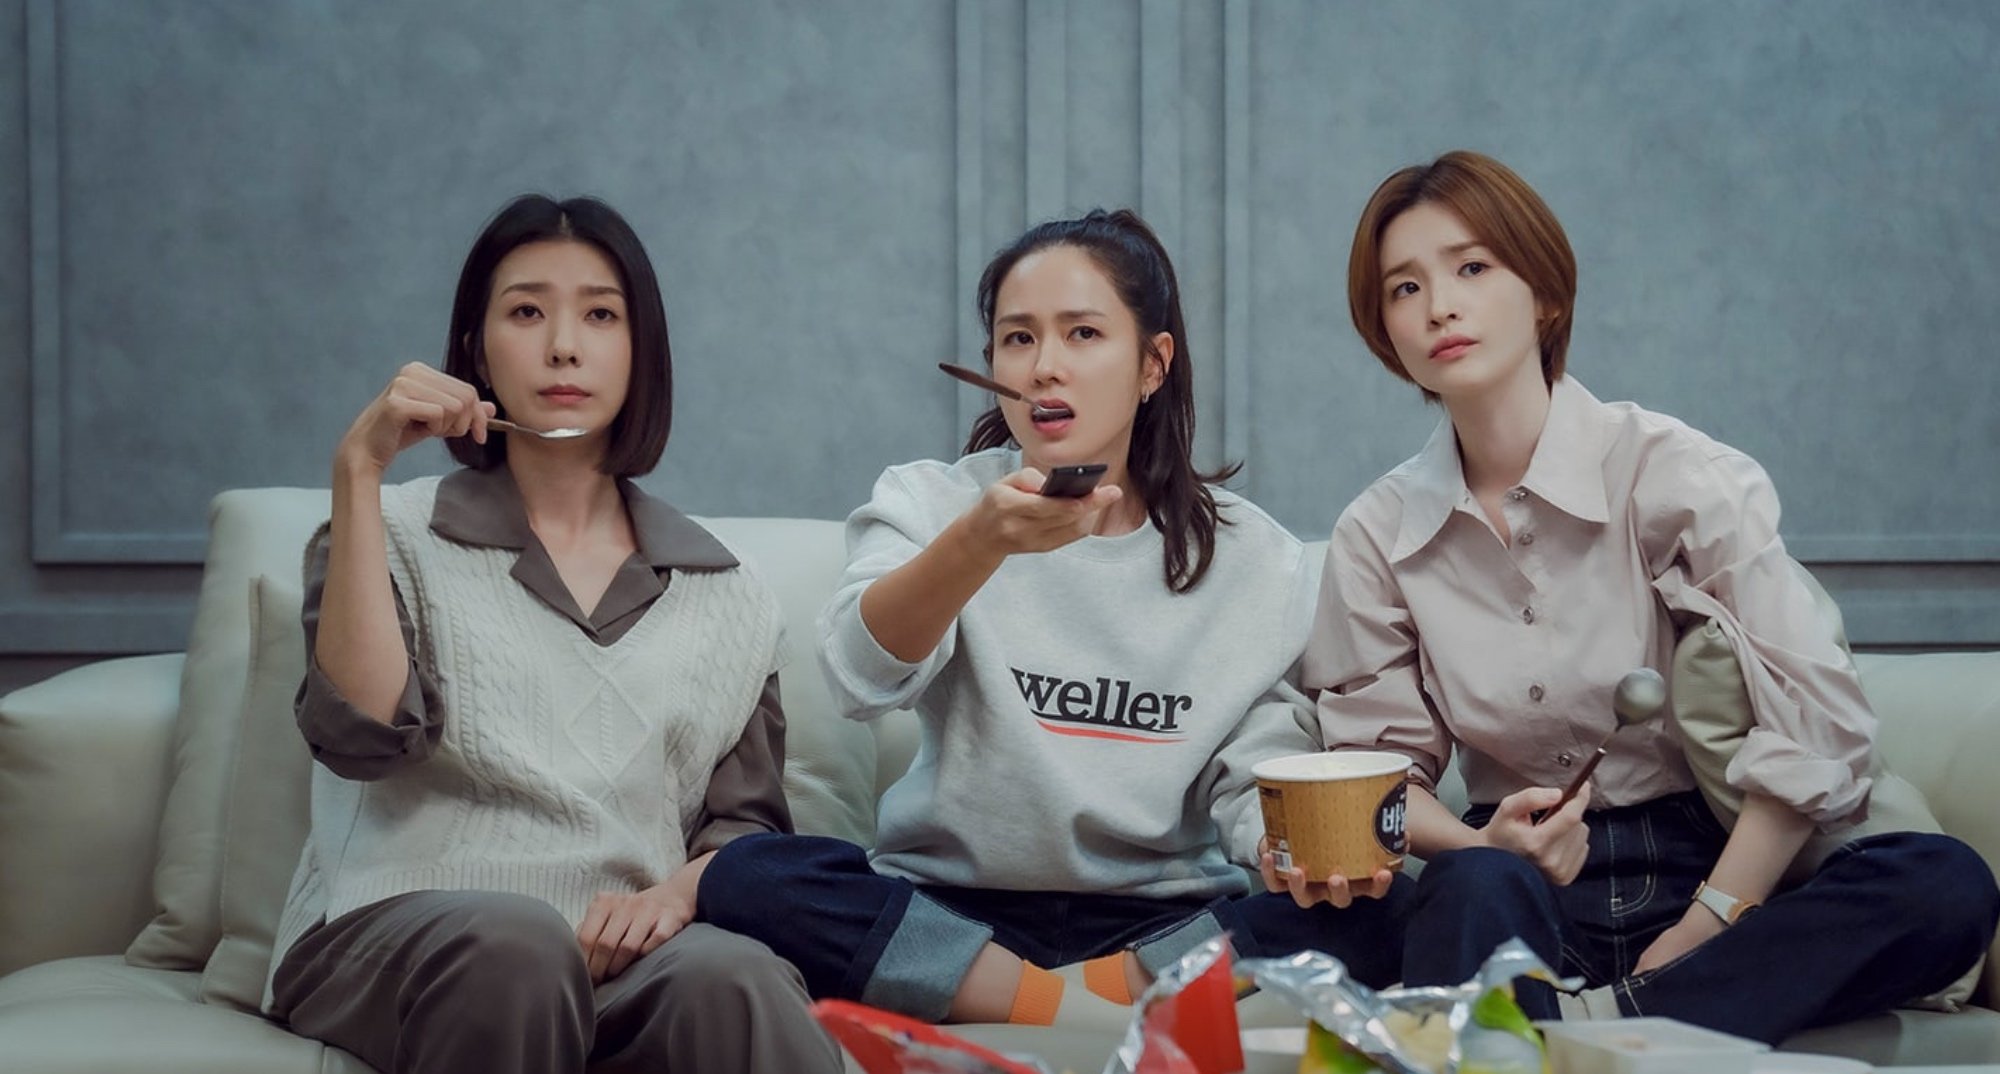 Main cast actors Kim Ji-hyun, Son Ye-jin, and Jeon Mi-do in 'Thirty-Five' eating ice cream on couch.